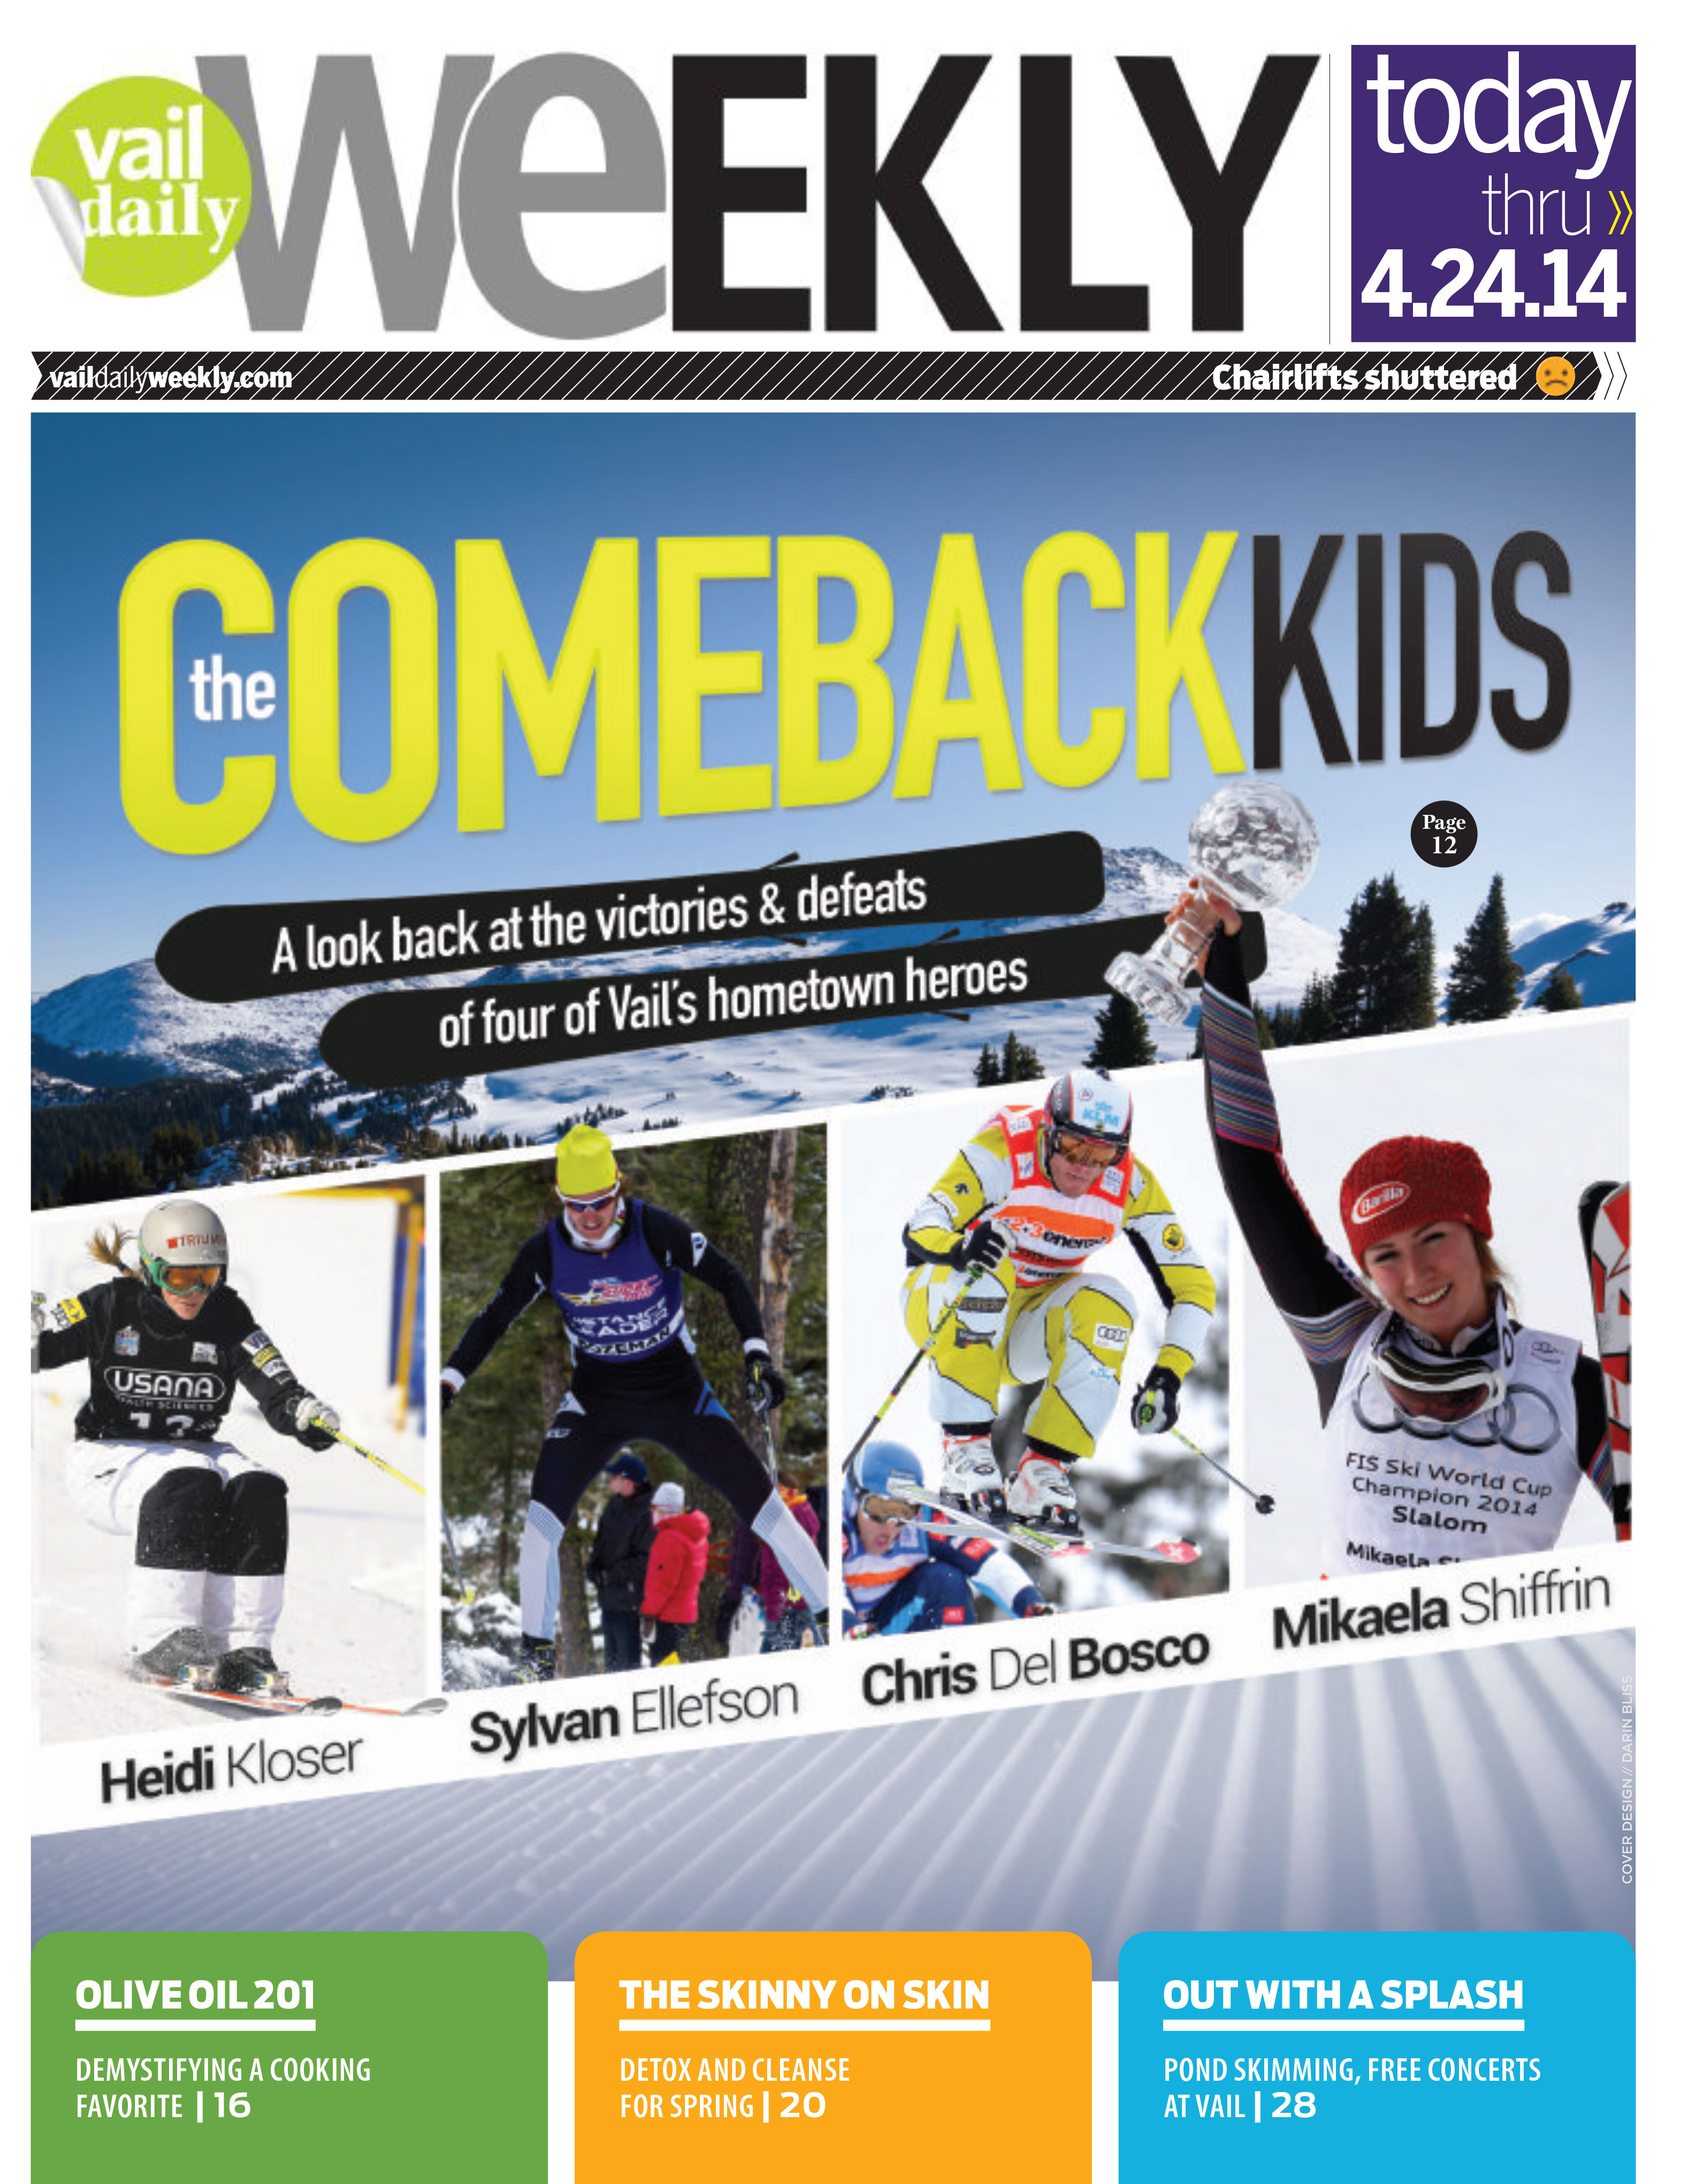 Vail-Daily-Weekly-Comeback-Kids-cover-story-cover-page-4-17-14